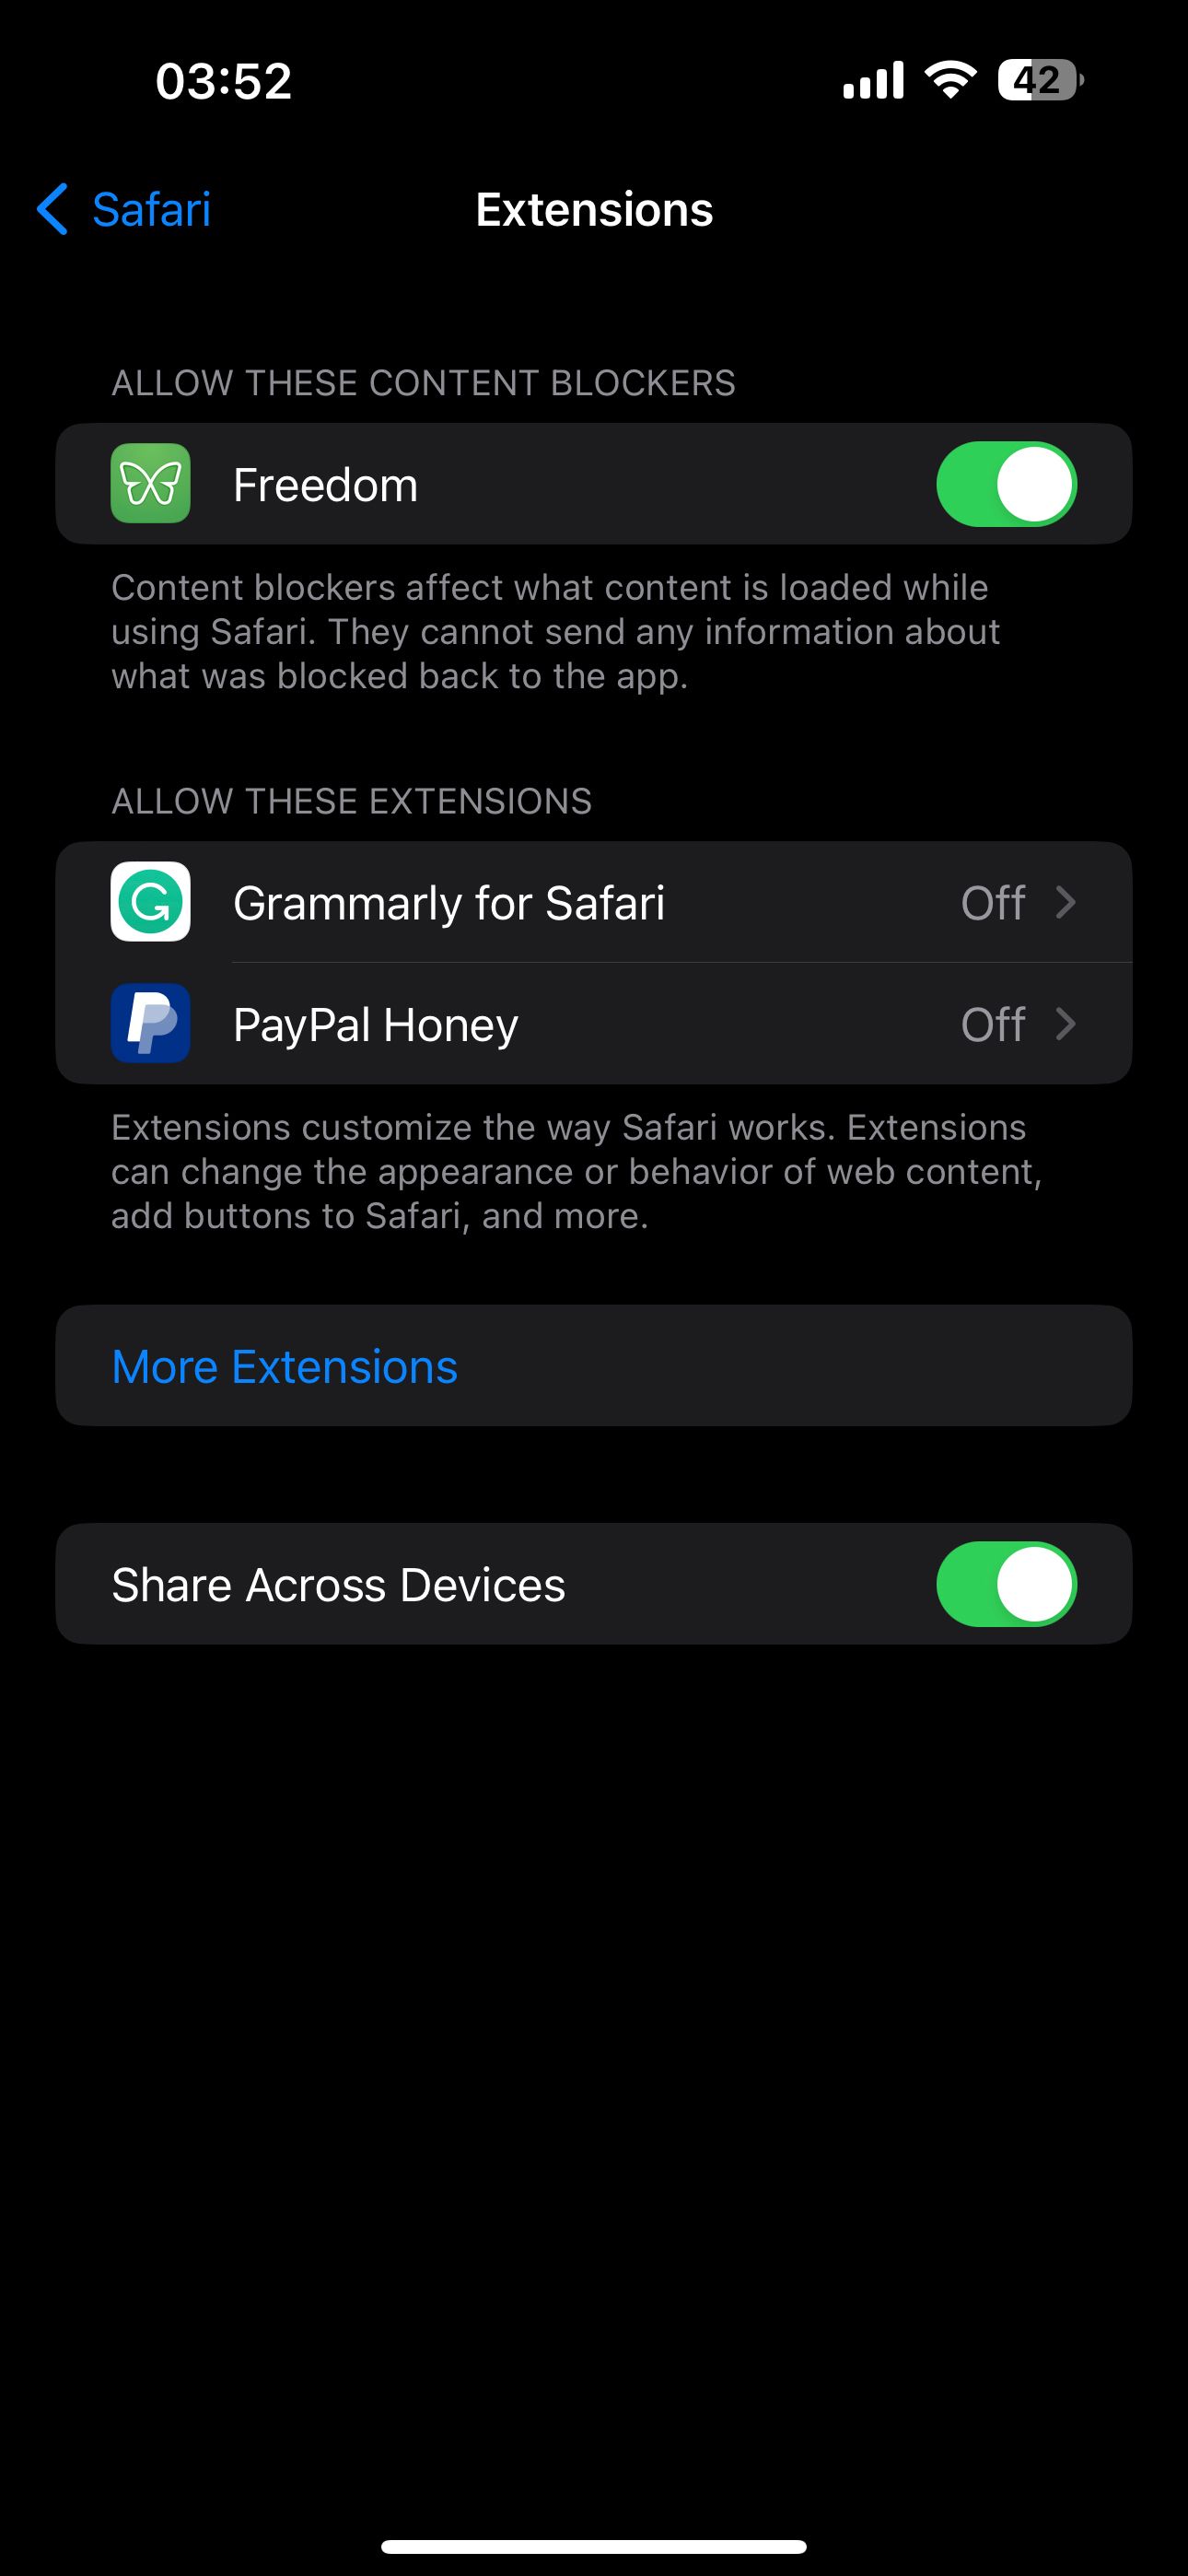 activating Freedom extension on Safari iOS